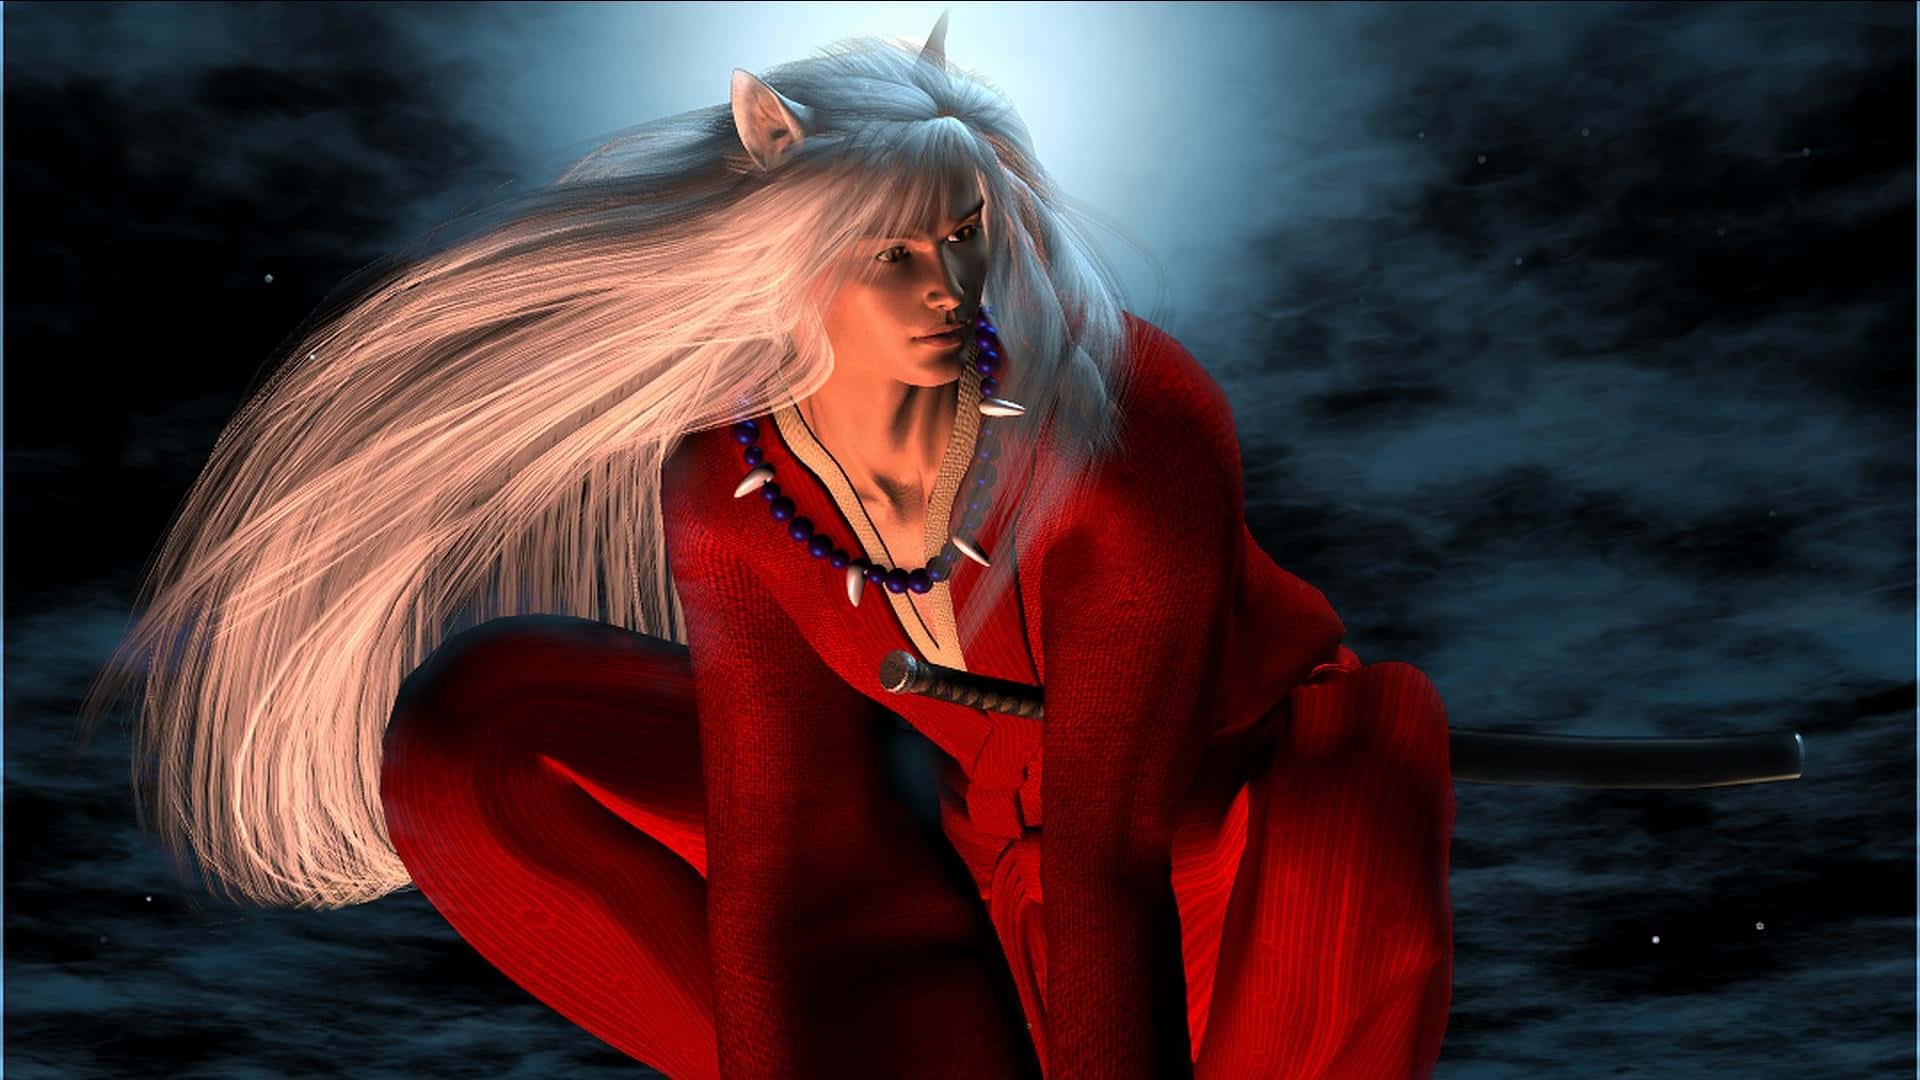 Prepare to join Inuyasha's journey in 4K! Wallpaper